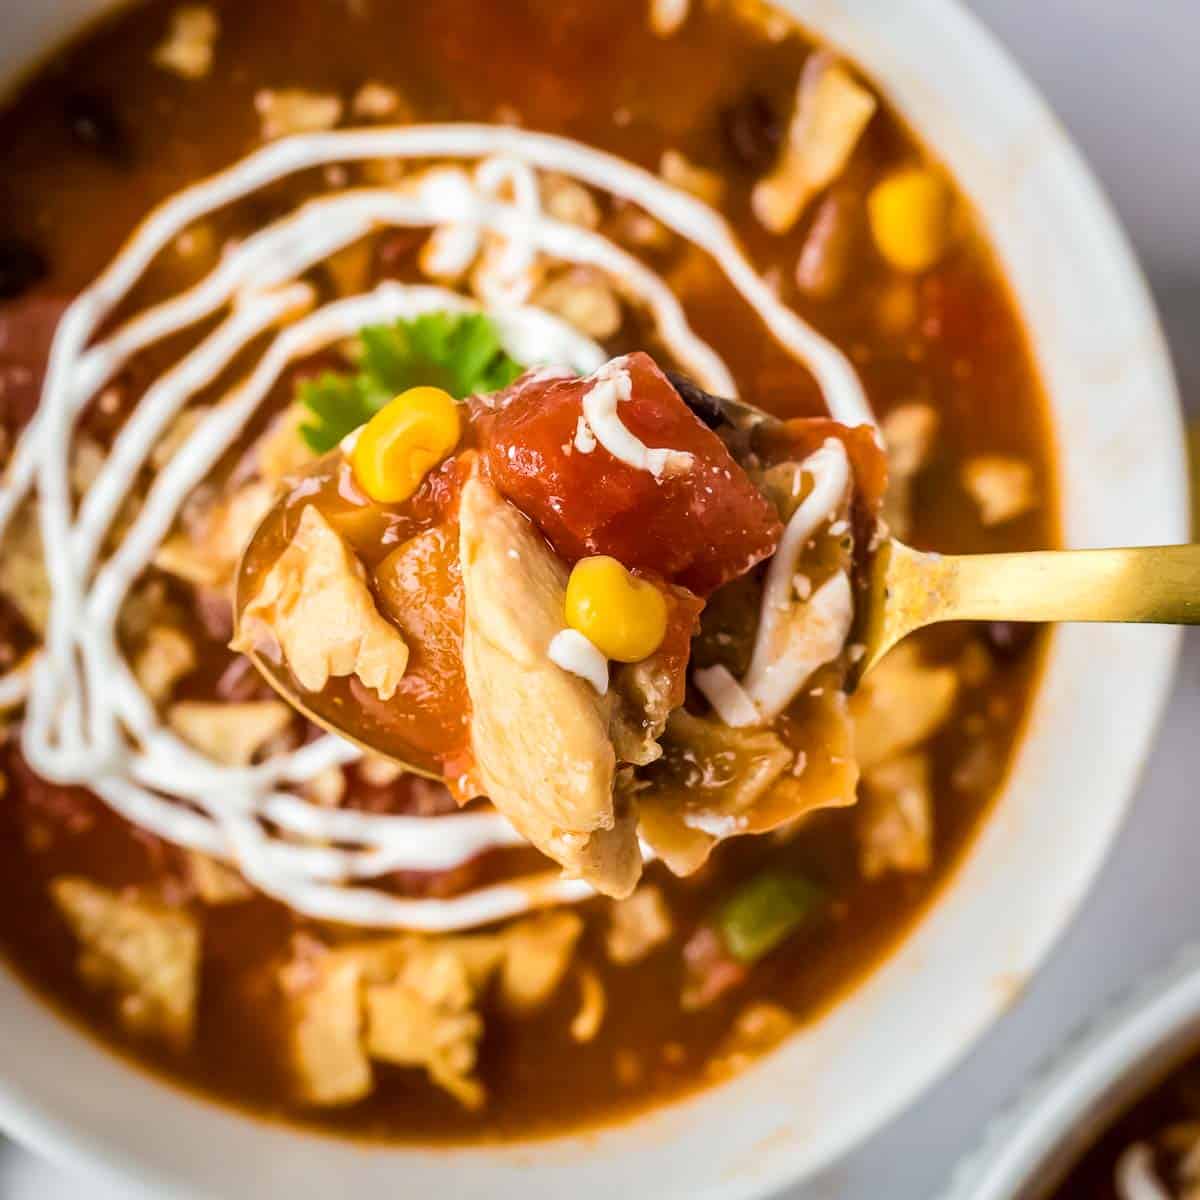 Overhead shot of a spoon holding a scoop of chicken tortilla soup over a white bowl with it.